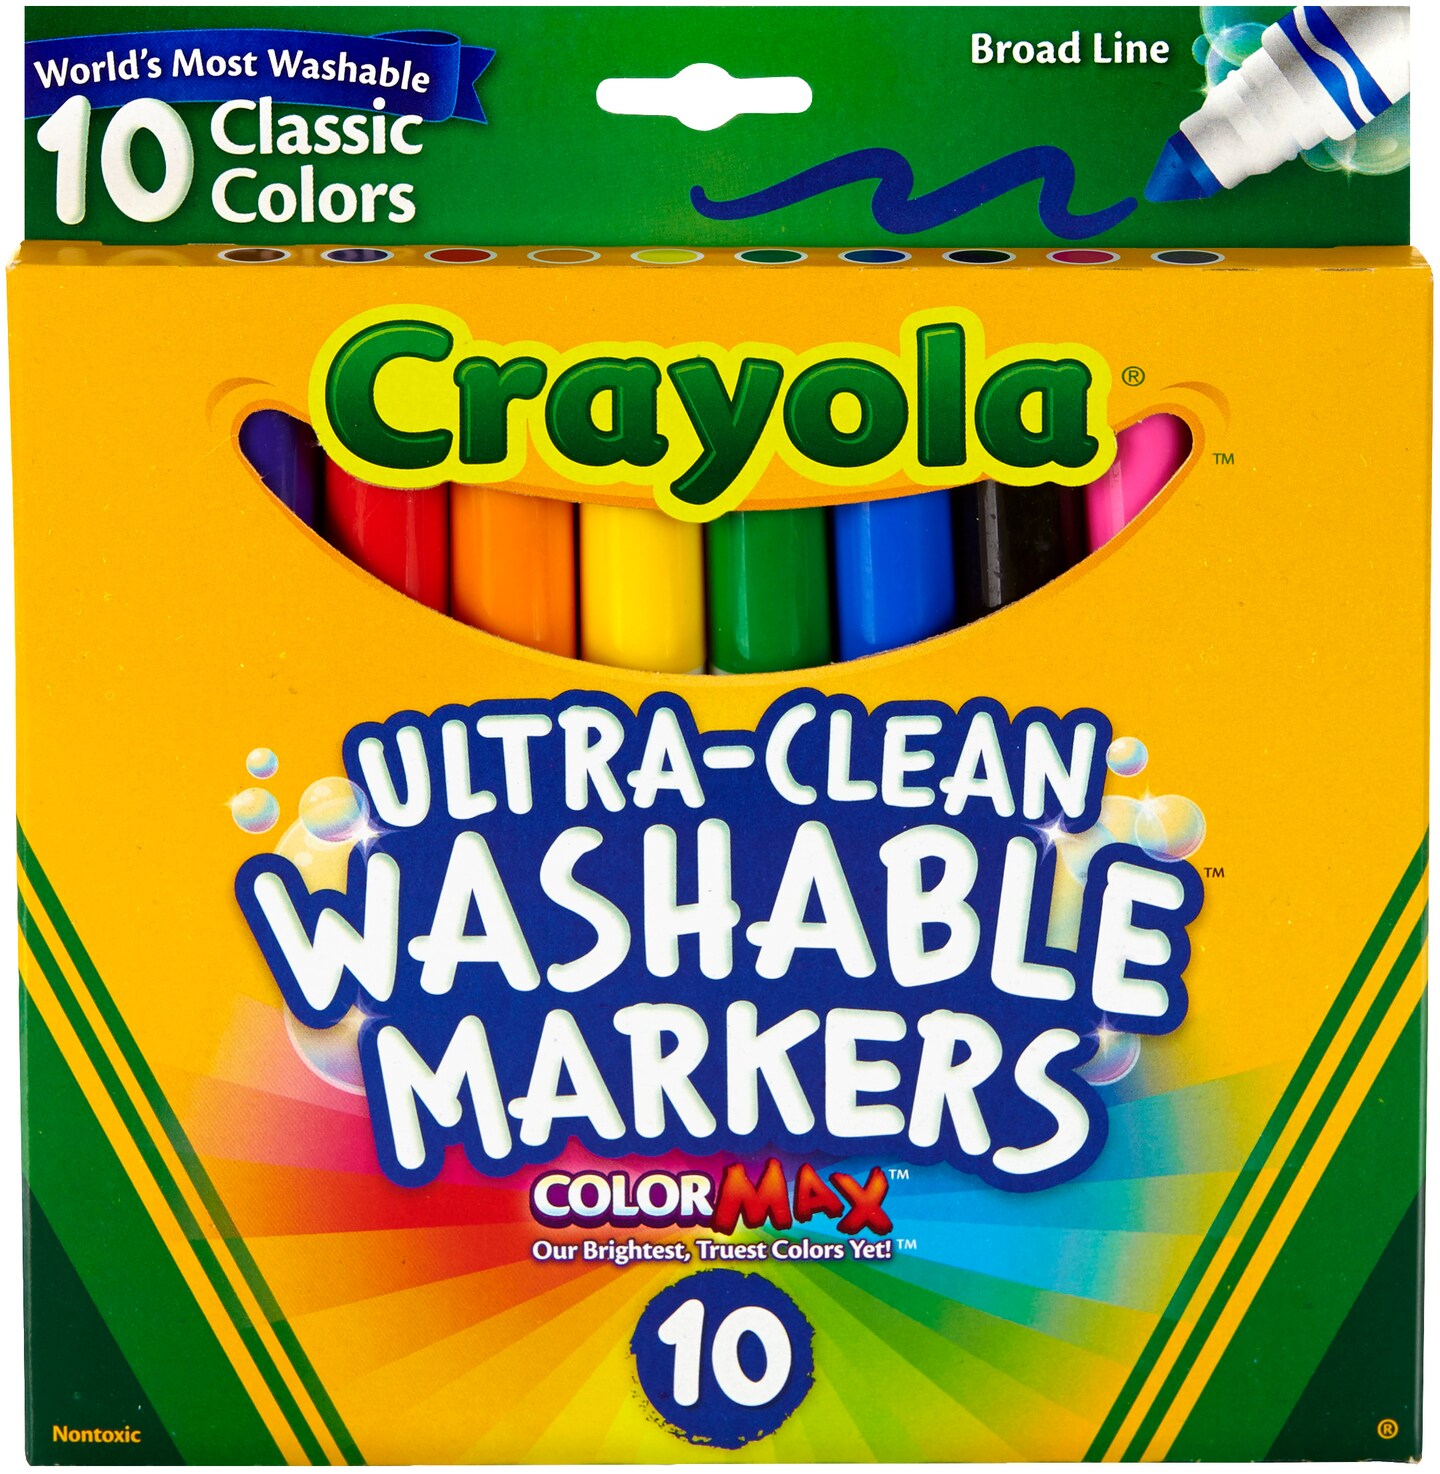 Crayola Ultra-Clean Color Max Broad Washable Markers 10/Pkg-Classic Colors